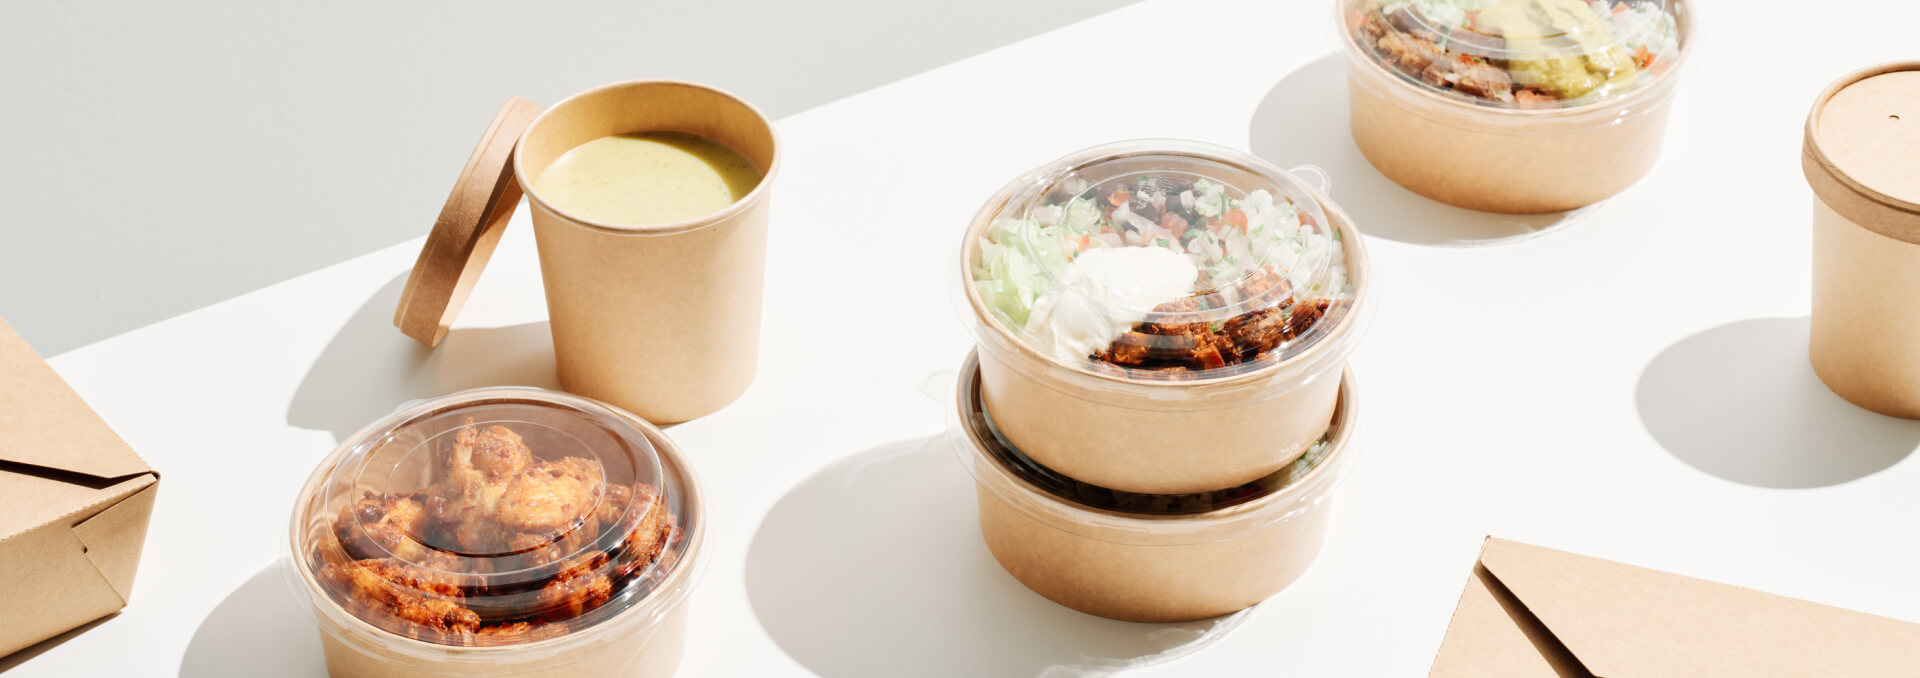 Reusable To-Go Containers  GoFoodservice Restaurant Supply